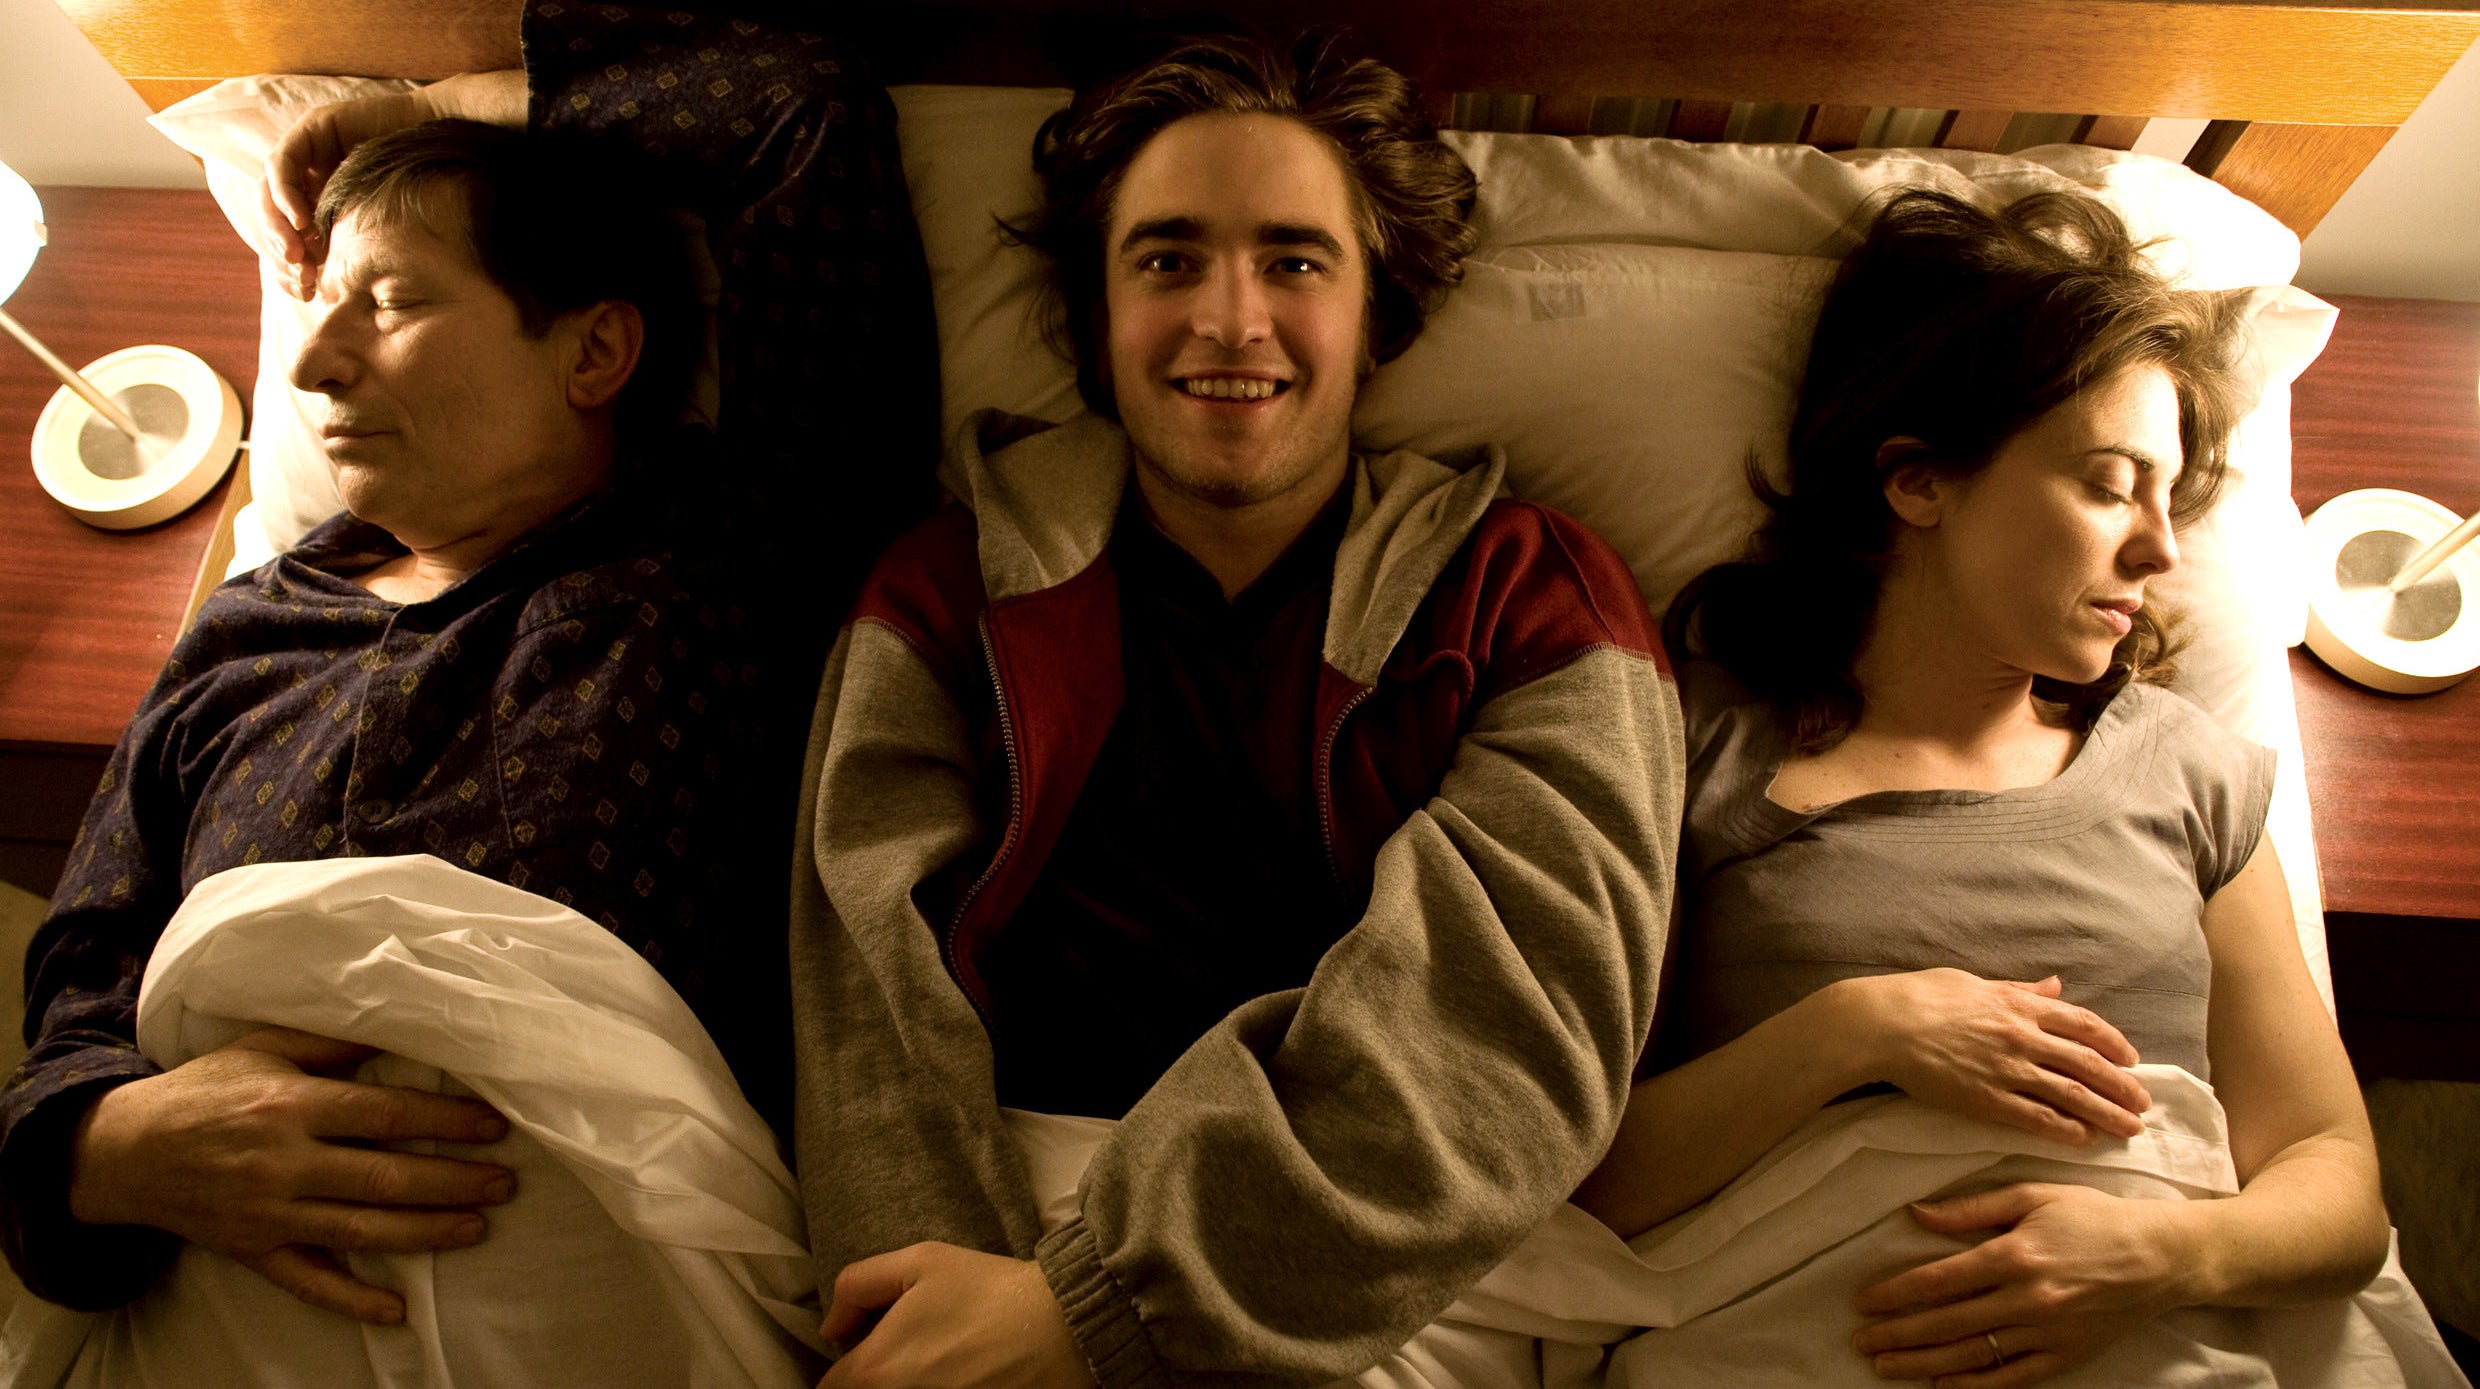 Robert Pattinson in bed with his parents on either side of him